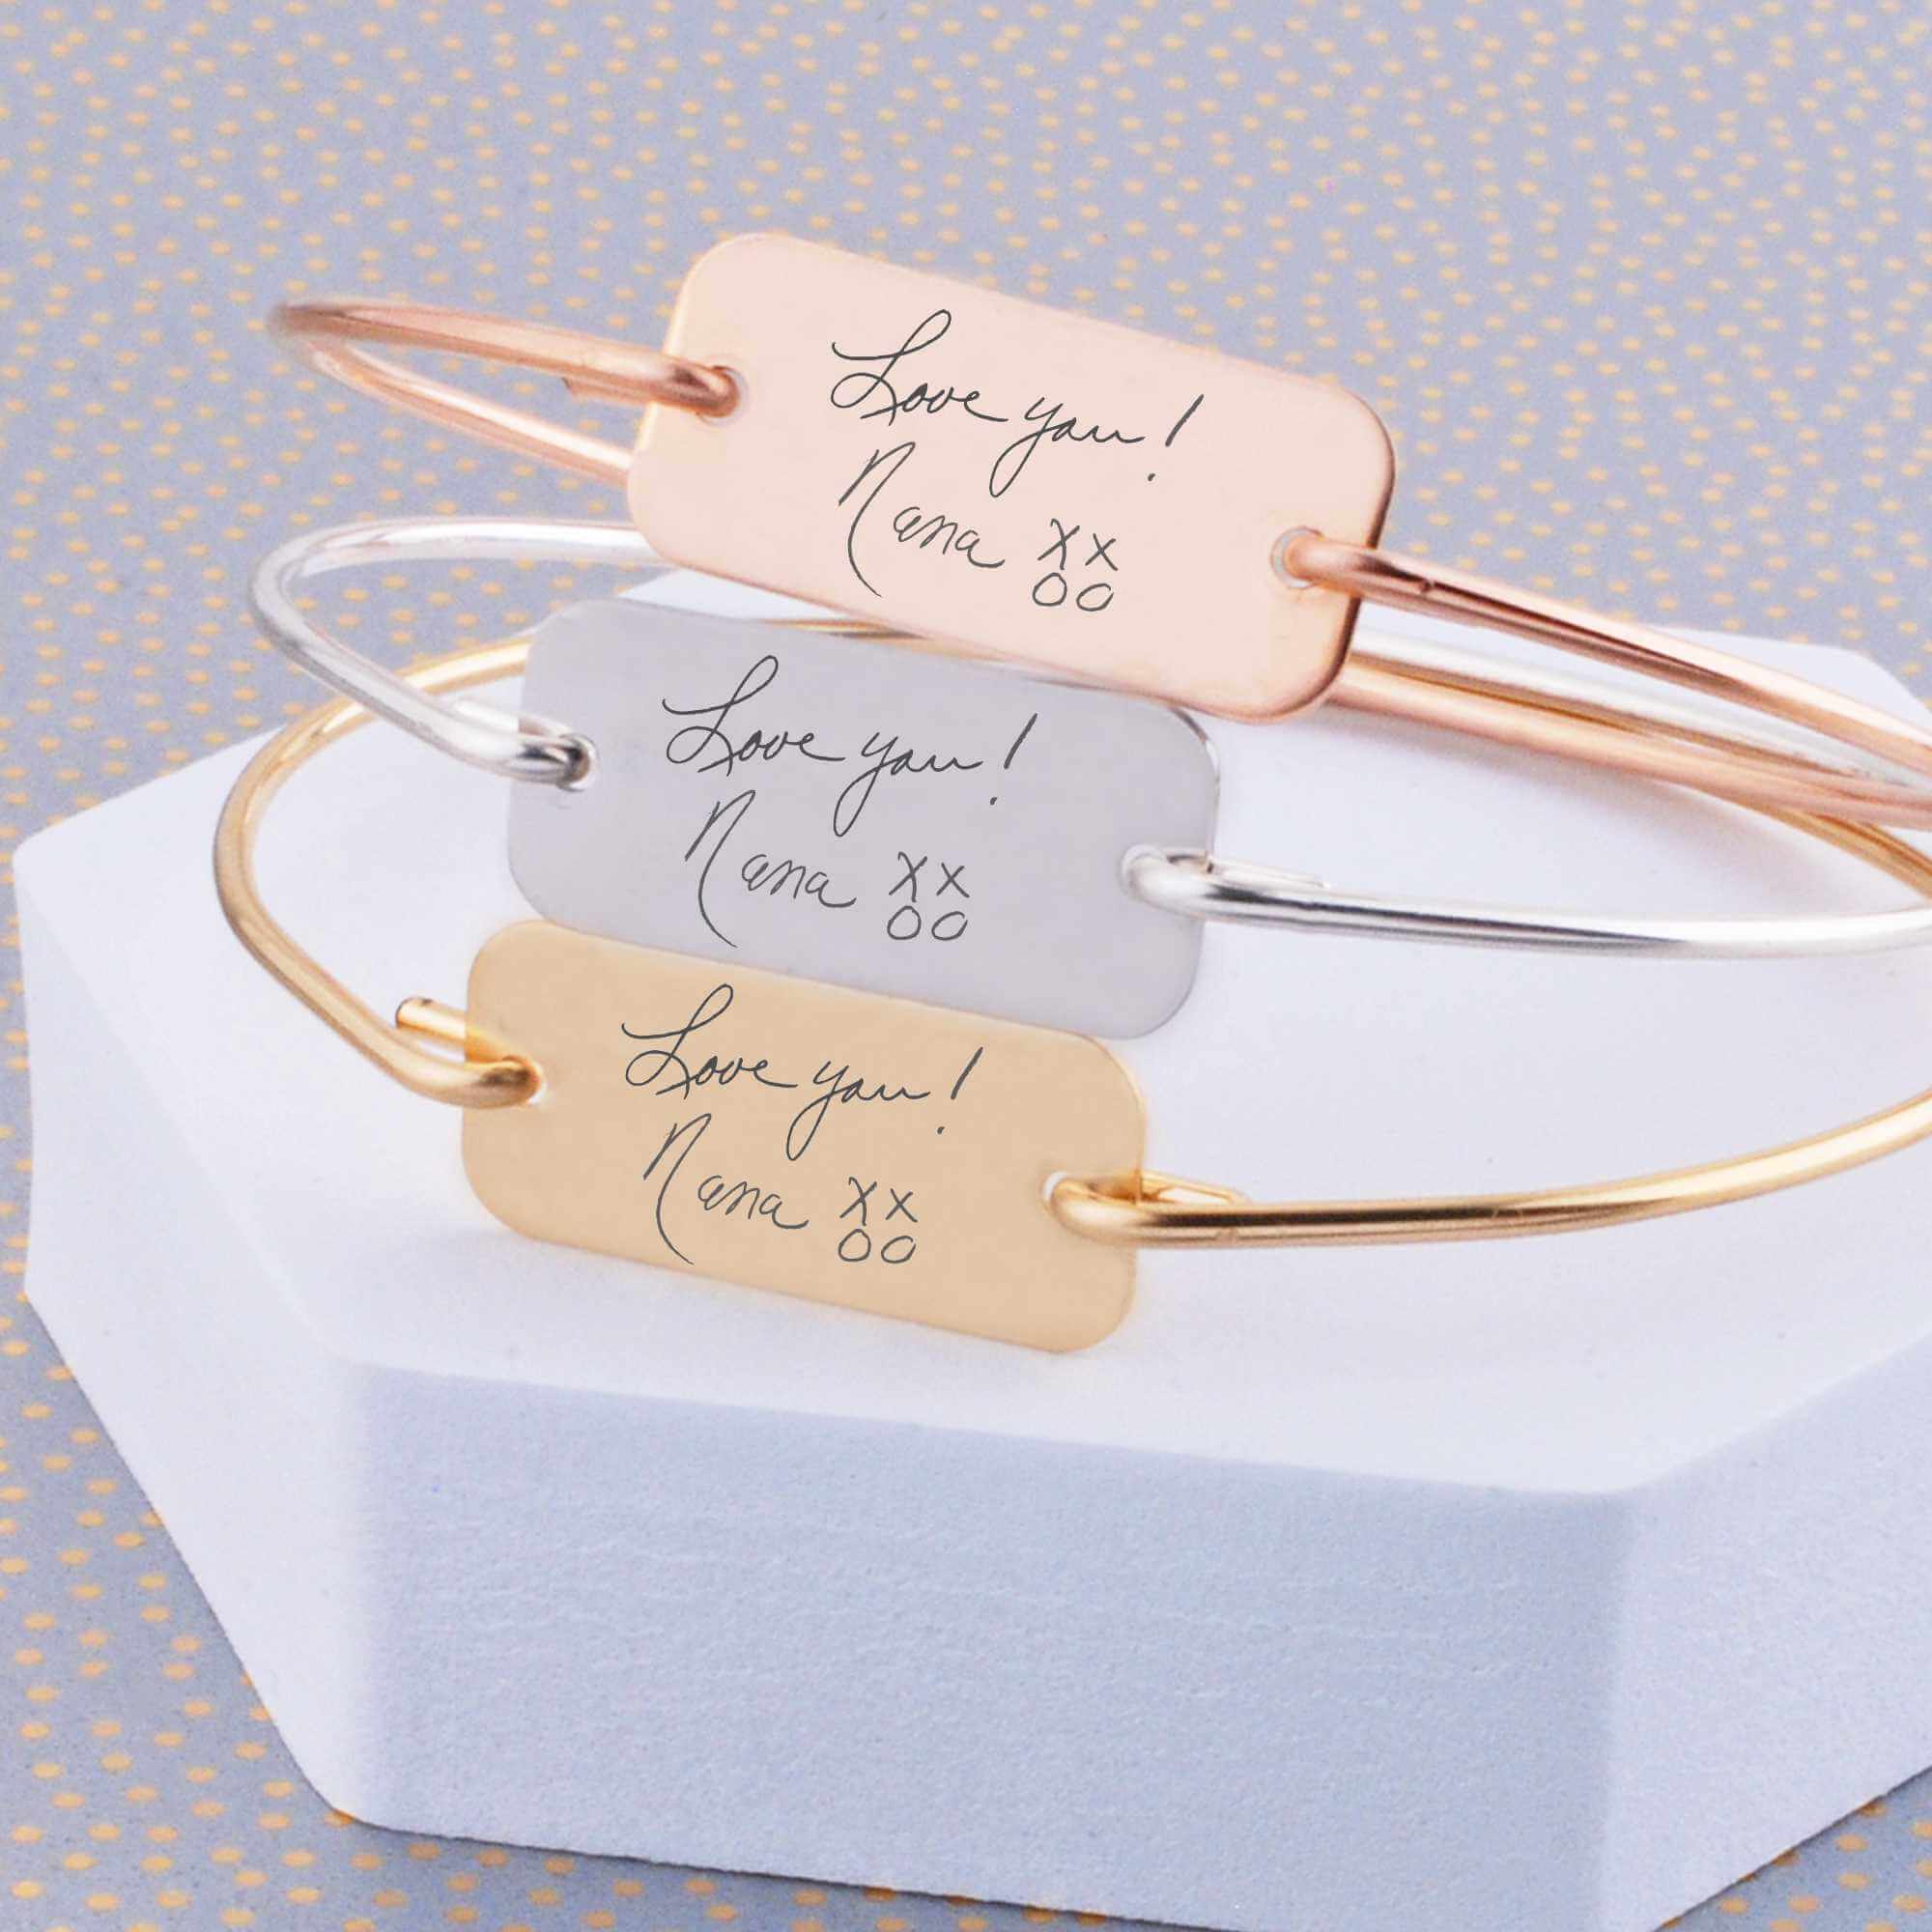 Gold Leather Monogram Bracelet, Initial Bracelet, Gifts for Women, Bridesmaid, Friends, Gifts for Her, Personalized Monogrammed for Girls